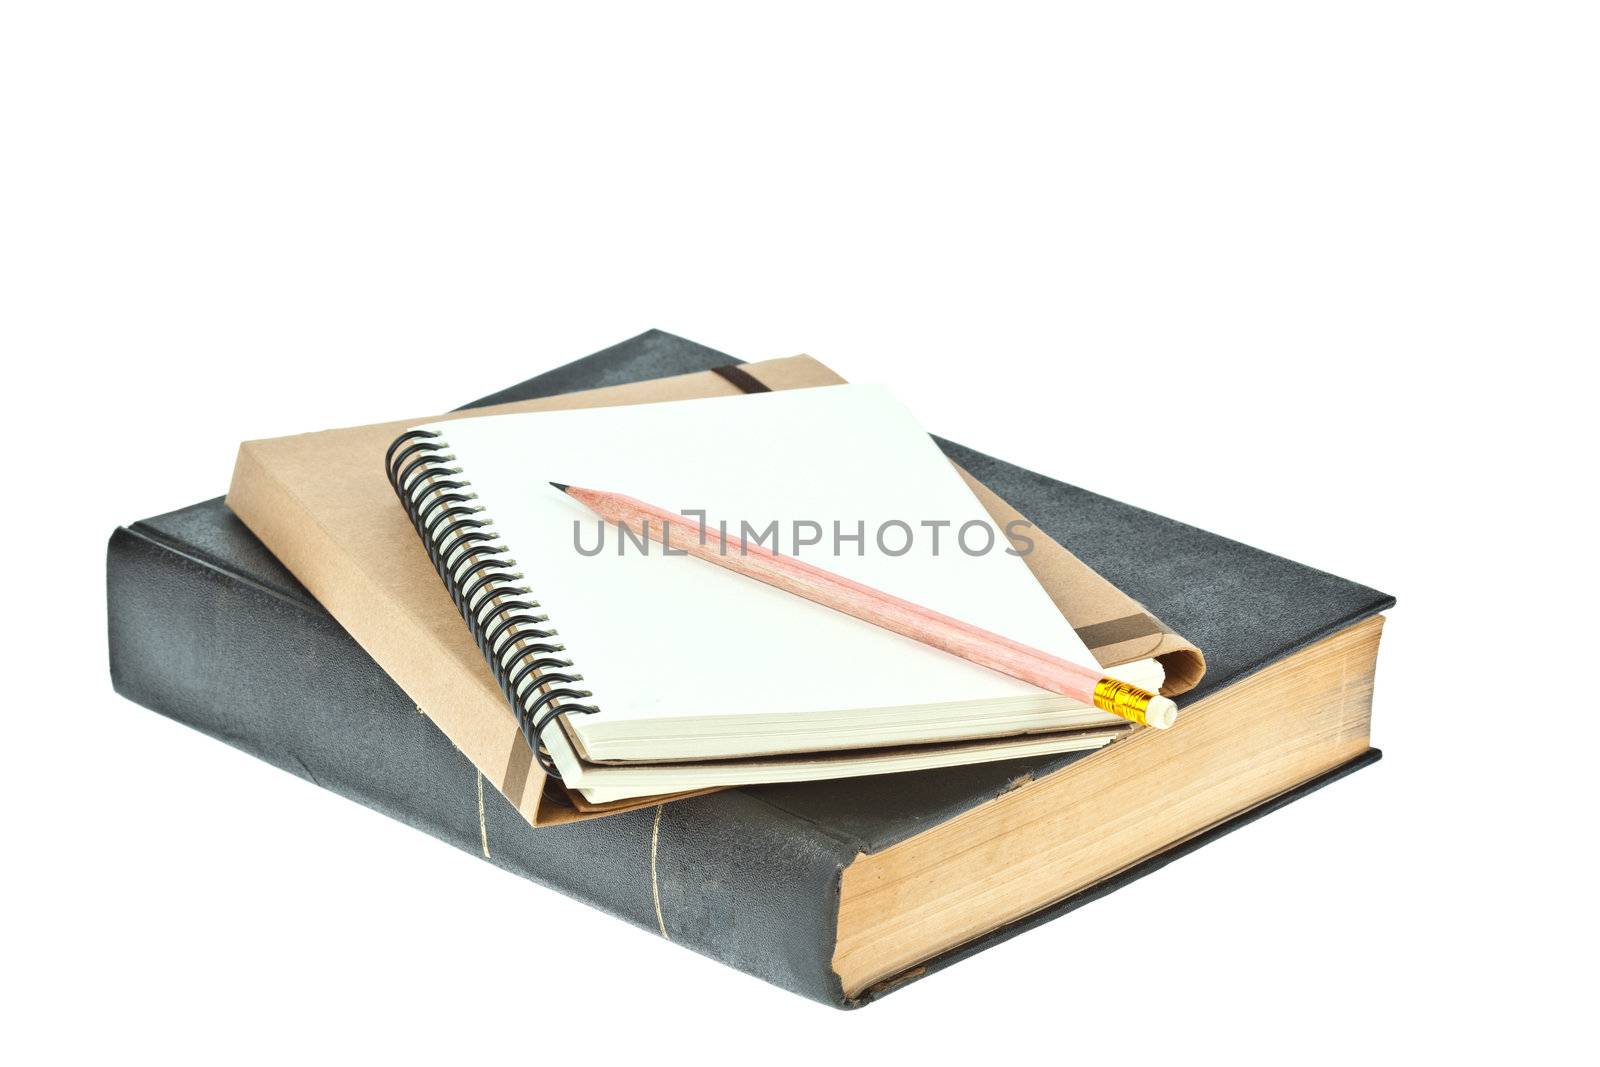 Pencil on Light cream color paper note book on brown book by FrameAngel